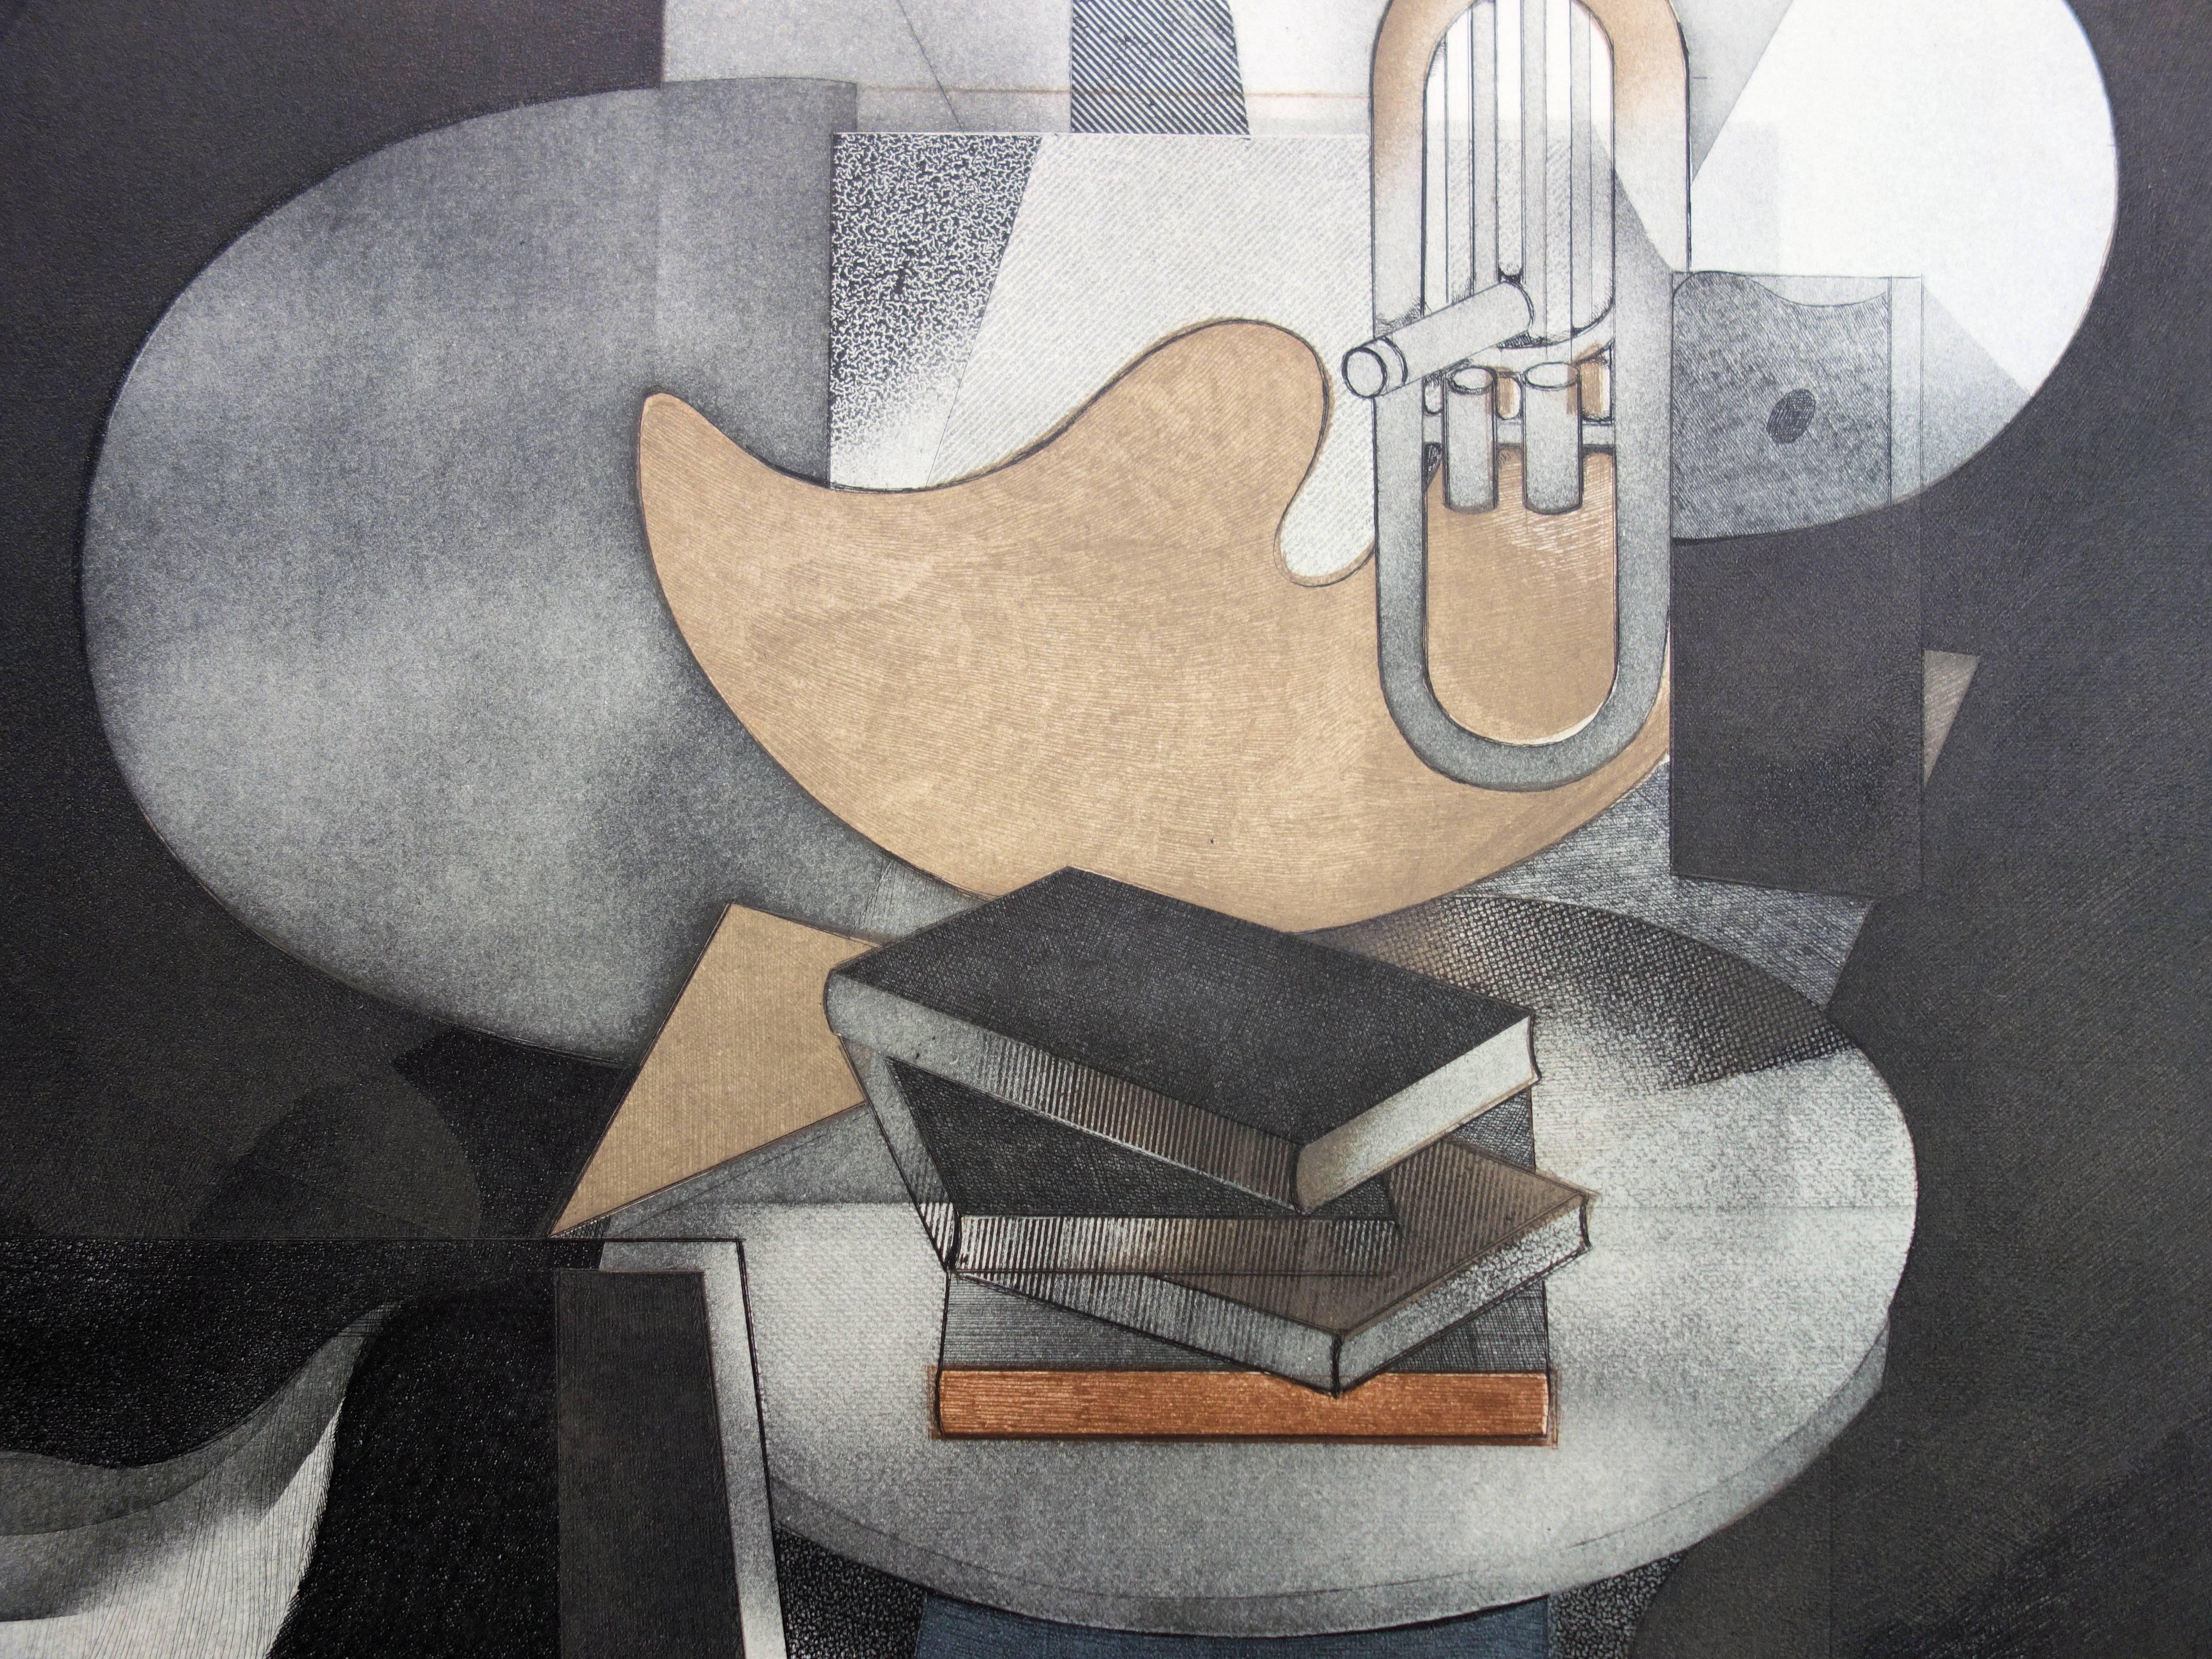 Cubist Still Life - Original Handsigned Etching - 150ex - Gray Interior Print by André Minaux